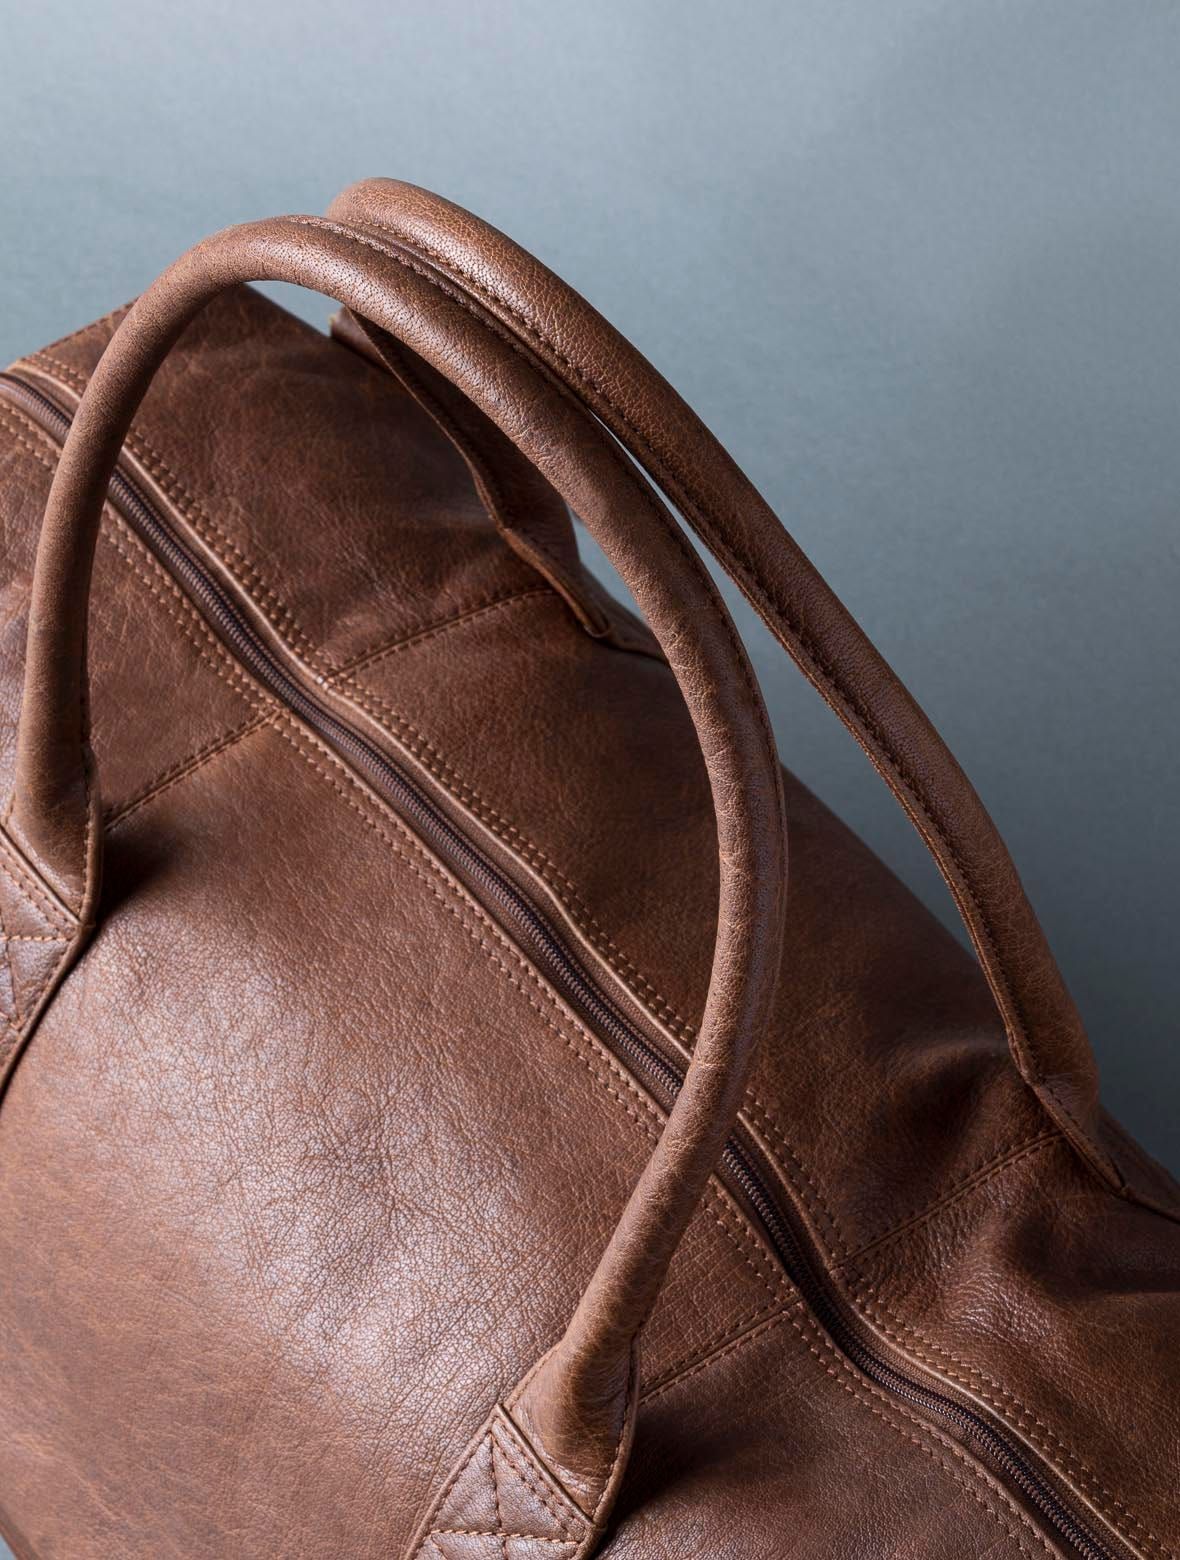 Introducing a classically shaped large leather holdall in buffed brown leather. The Discoverer range are crafted from lightweight leather, but designed to be rugged and stand the test of time. The tan brown leather is paired with brushed brass colour hardware. Packed with the features you'd expect from a Lakeland Leather holdall; two external pockets, spacious lined interior, detachable shoulder strap and grab handles.